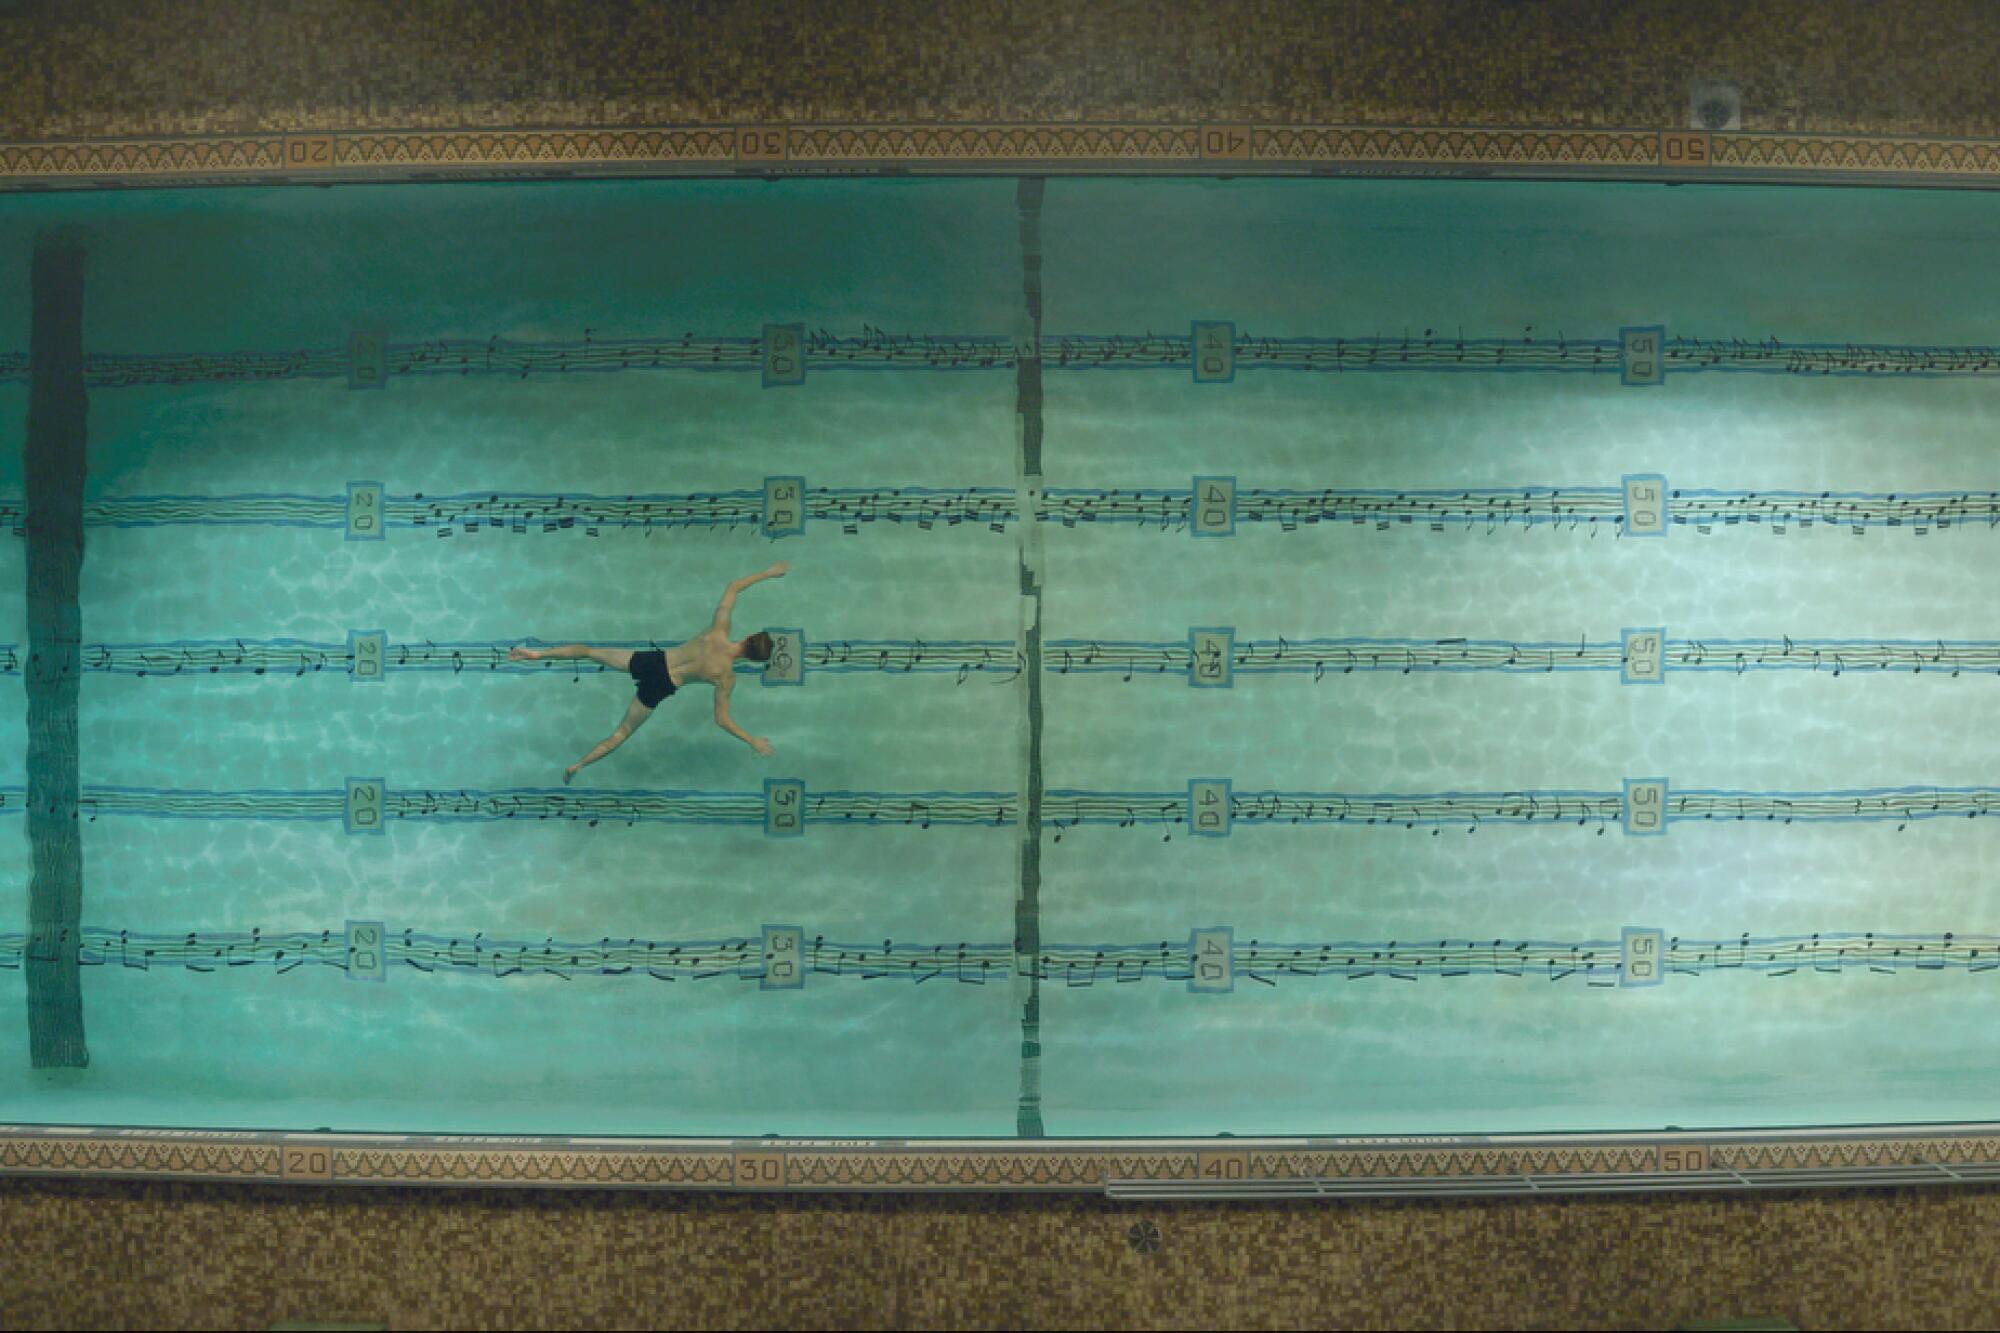 Andrew Garfield swims in a large pool with musical notes on the bottom in "Tick, Tick...Boom!"